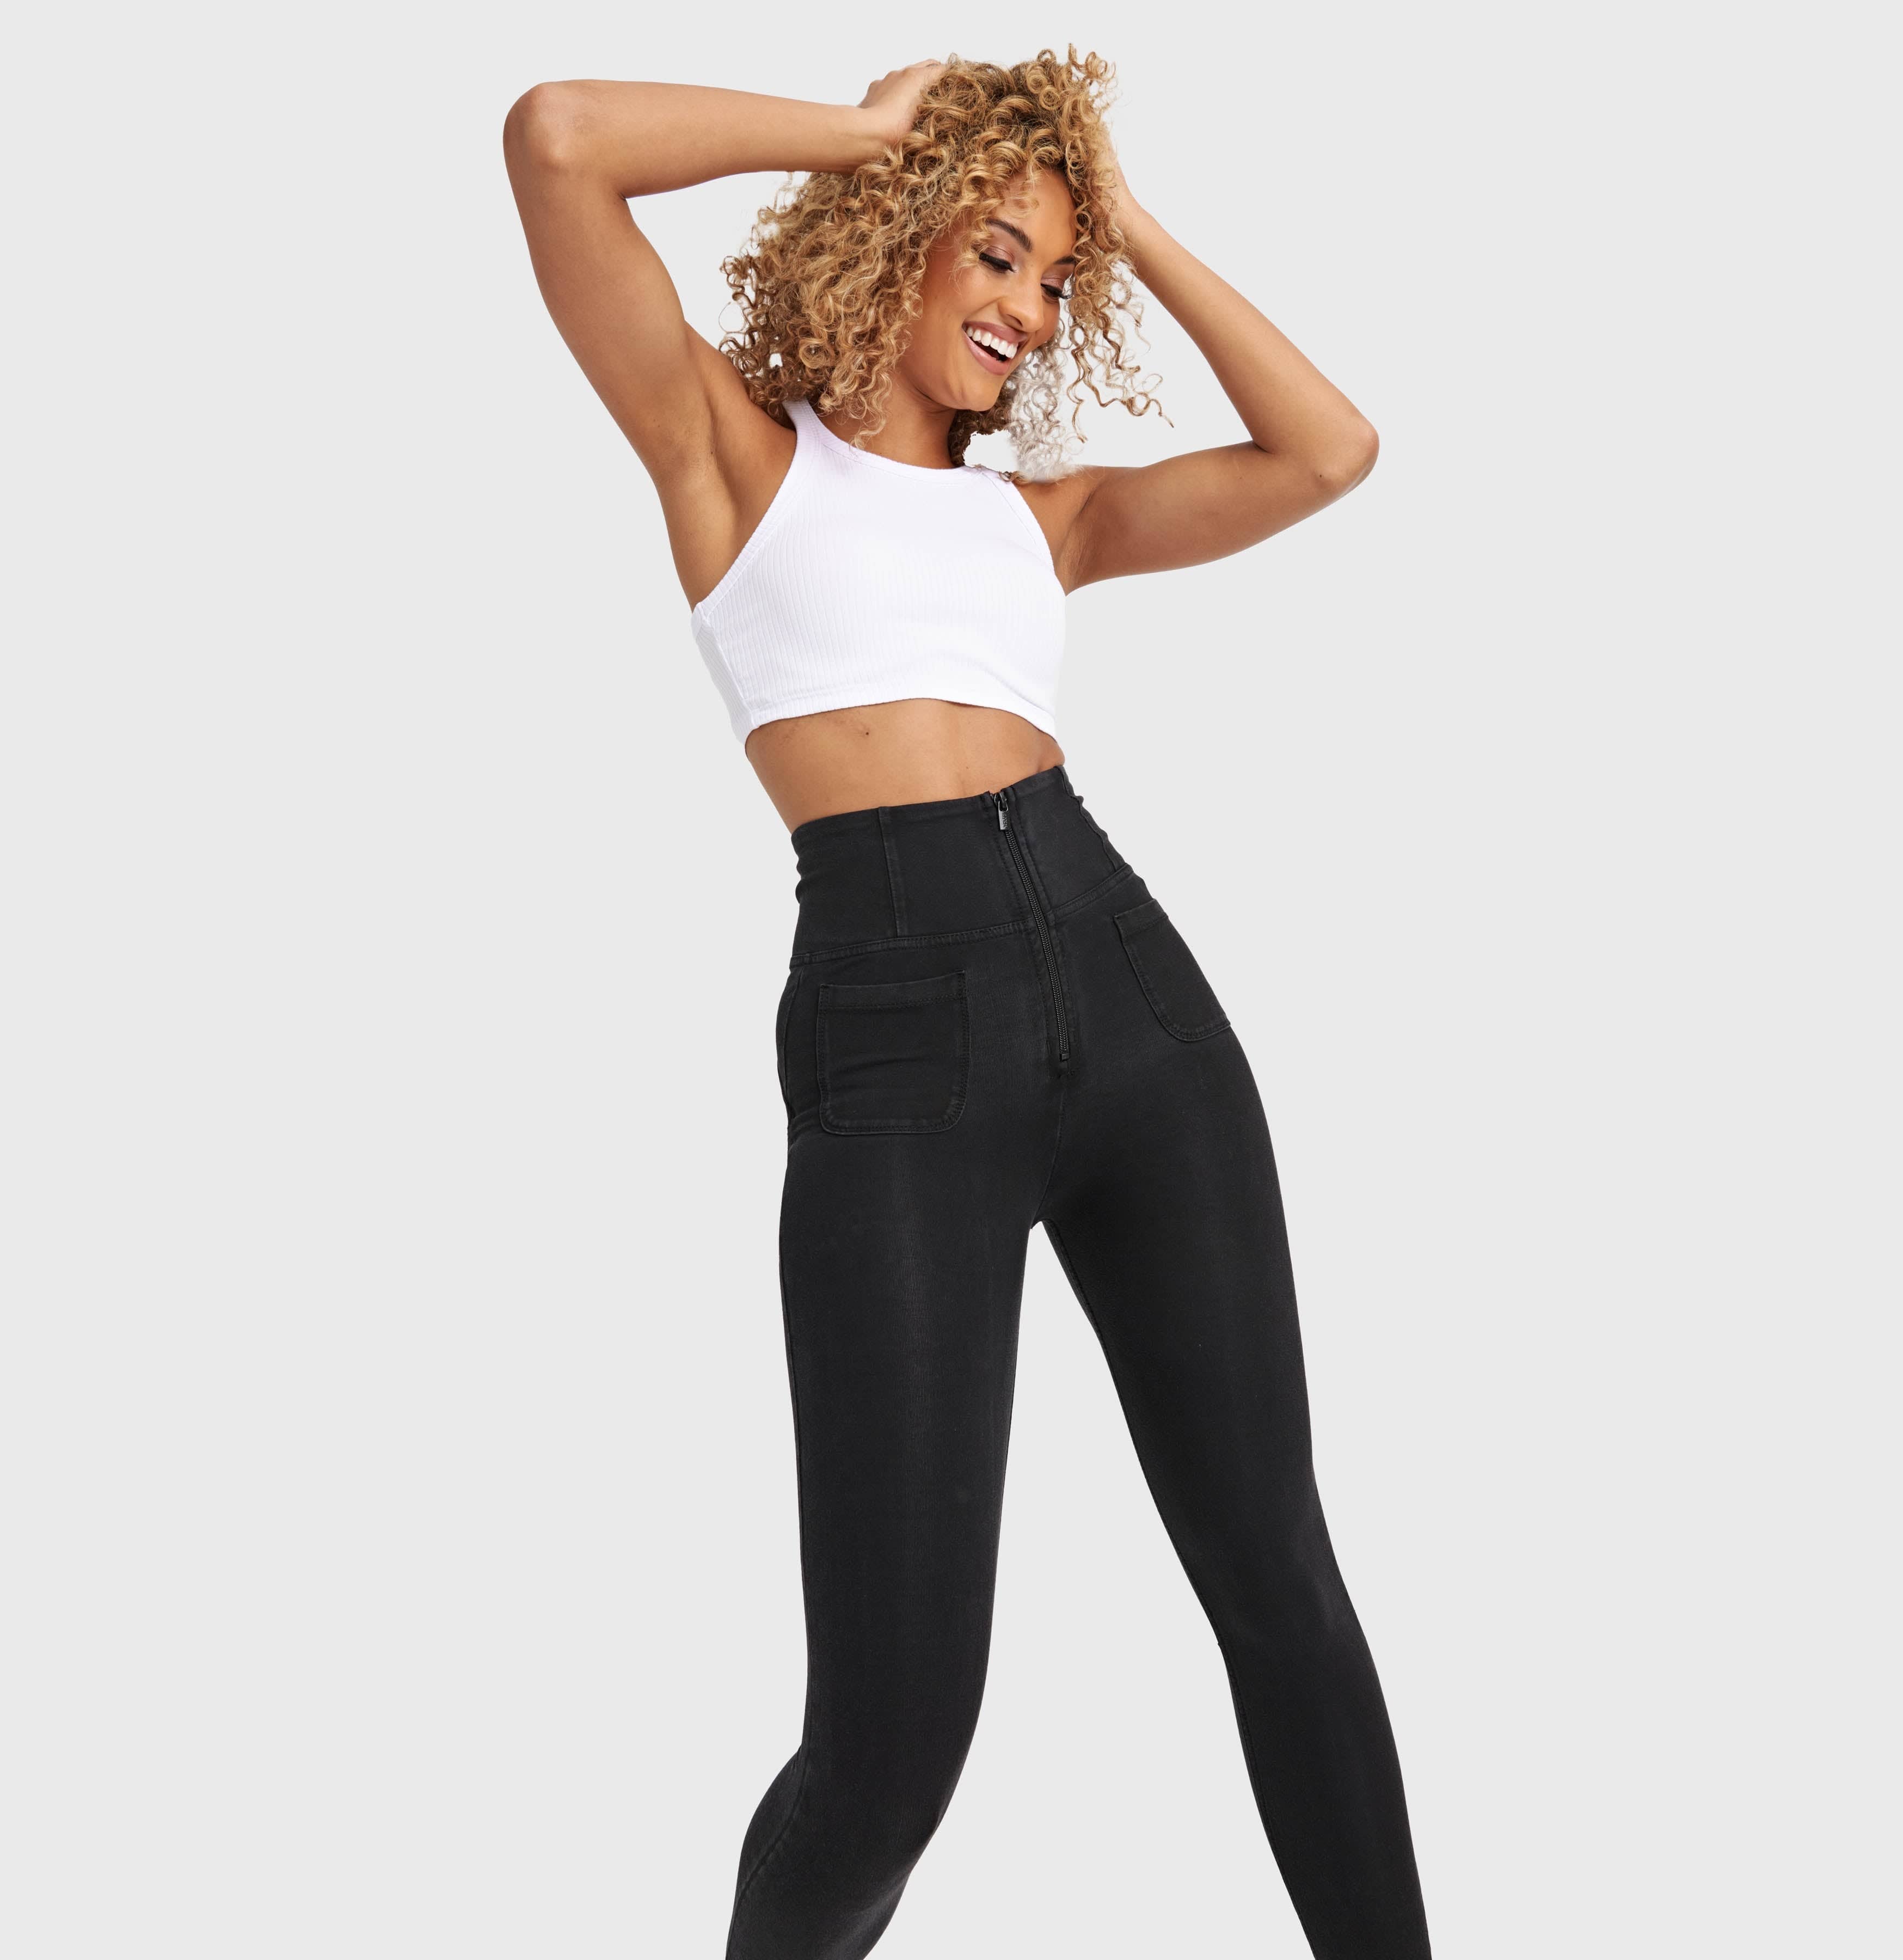 WR.UP® Denim With Front Pockets - Super High Waisted - 7/8 Length - Black + Black Stitching 2